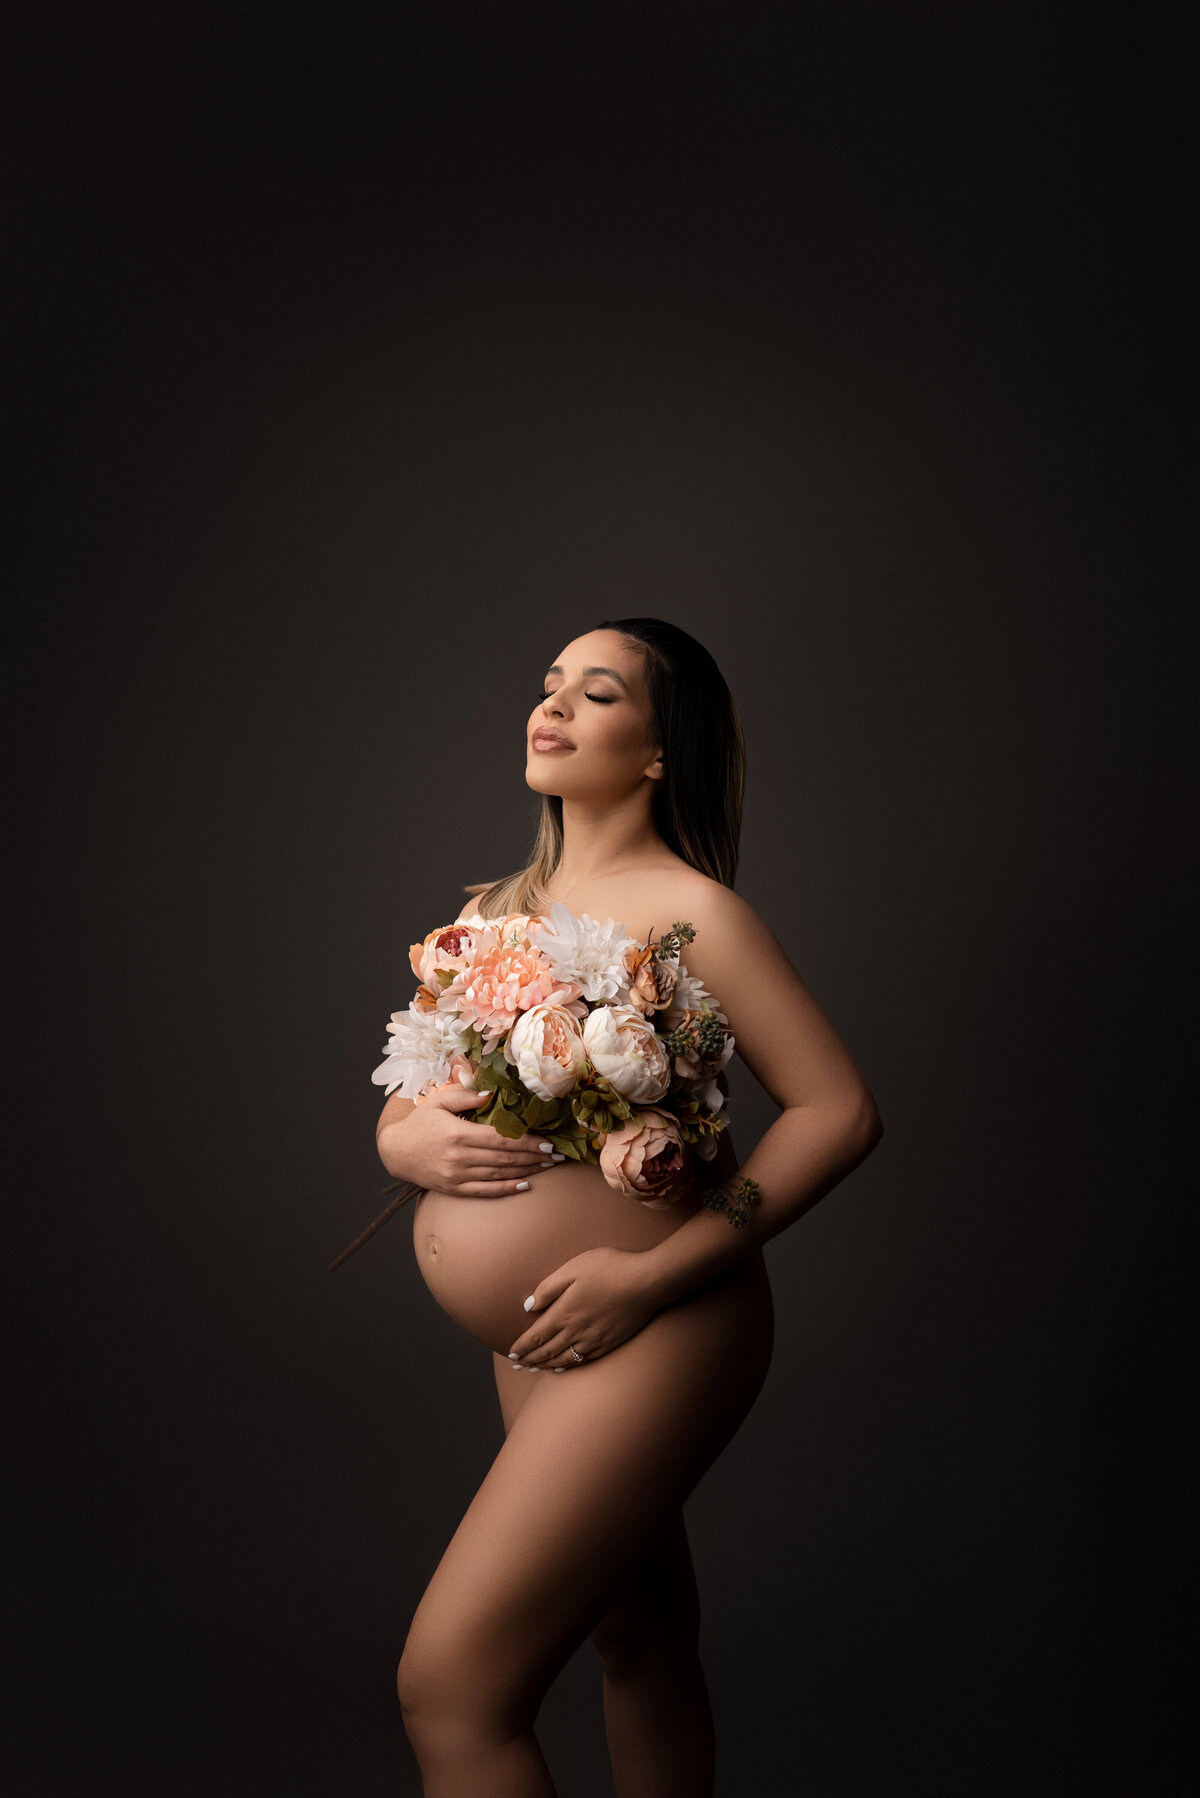 Maternity photograph by Katie Marshall,  premier maternity photographer in New Jersey. The image features a woman standing bare against a grey backdrop, with one leg gently bent and her forearm supporting her baby bump. Her bosom is tastefully covered with a floral bouquet. Her closed eyes are directed upwards towards the light source, creating a play of shadows for added depth and drama, resulting in an artistic and emotive maternity image.